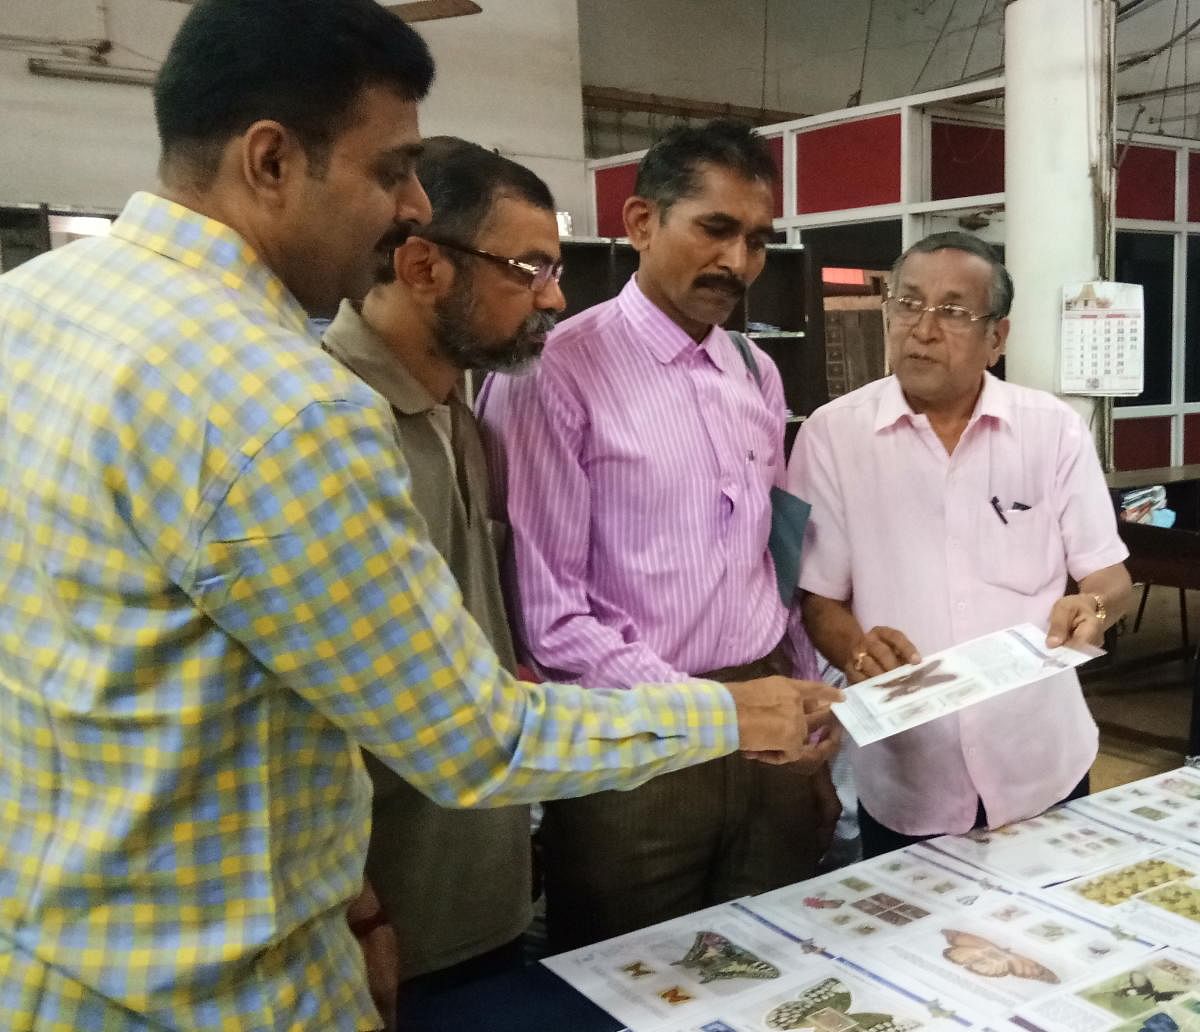 Baikady Shrinivas Rao (extreme right), explains his collection to the visitors during the philatelic exhibition at the head post office in Pandeshwara, Mangaluru, on Sunday.